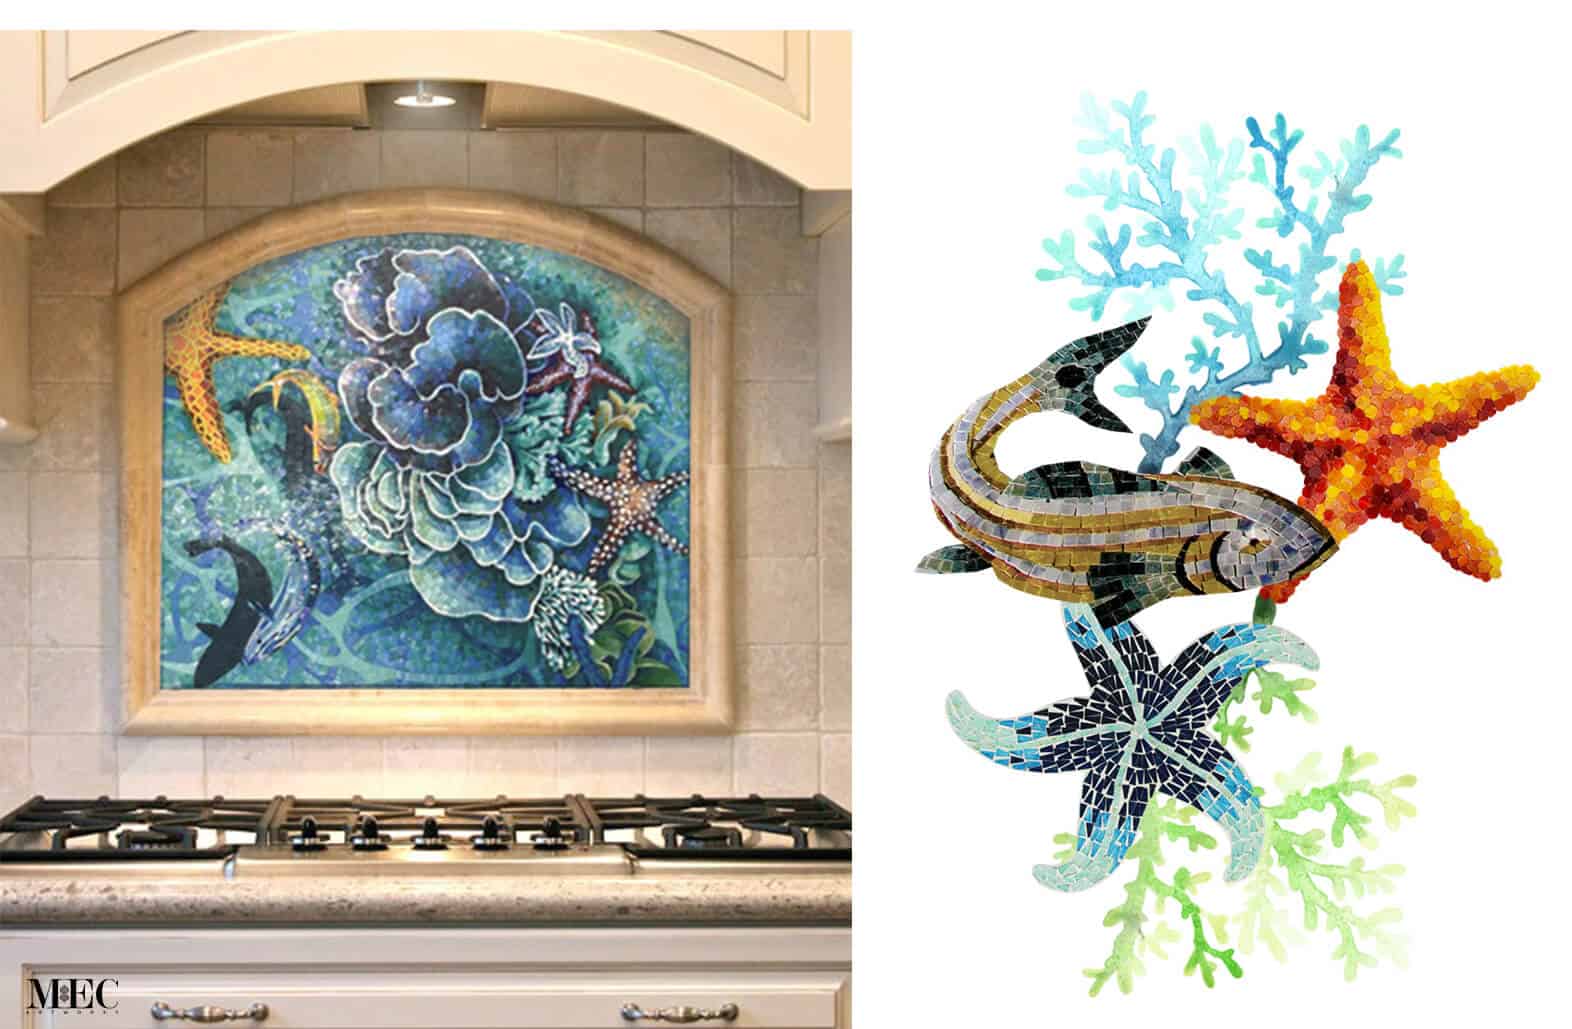 underwater mosaic ocean scene featuring assorted starfish, fish, seaweed and corals. The image is a collage of the photo and inspiration elements on the right